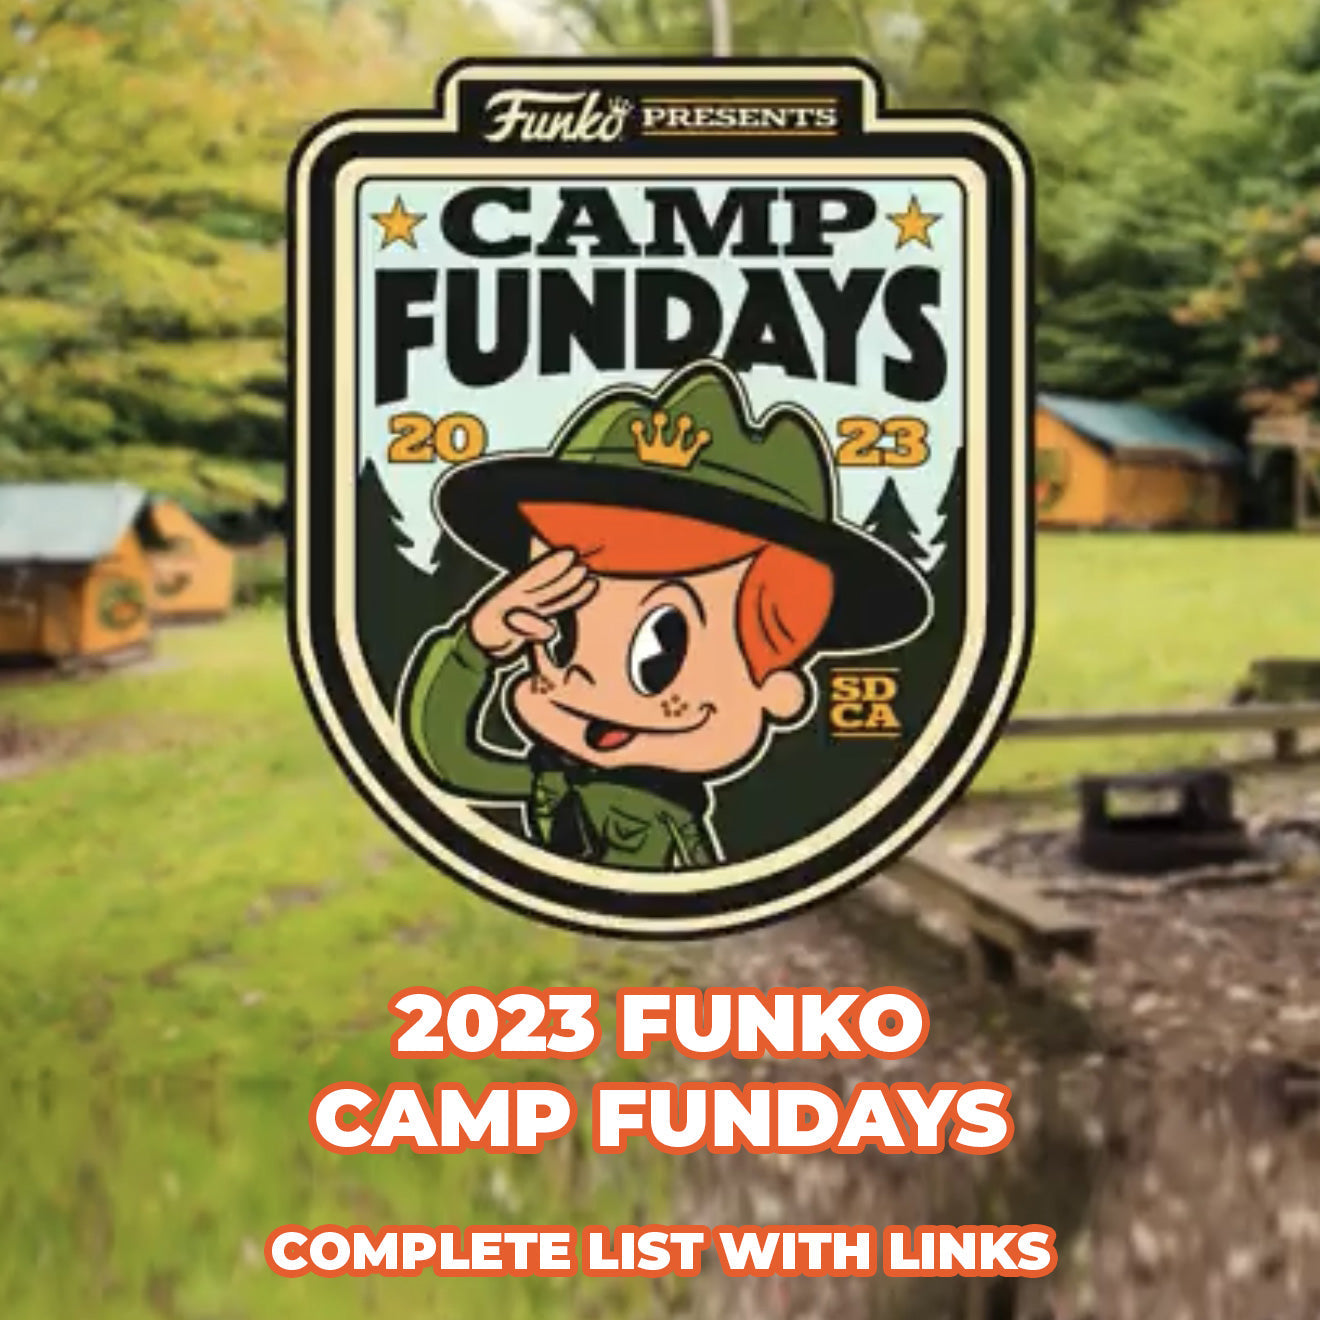 SDCC 2023 Funko Fundays, Hall H Panel, Box of Fun &amp; NFT Complete List with Links